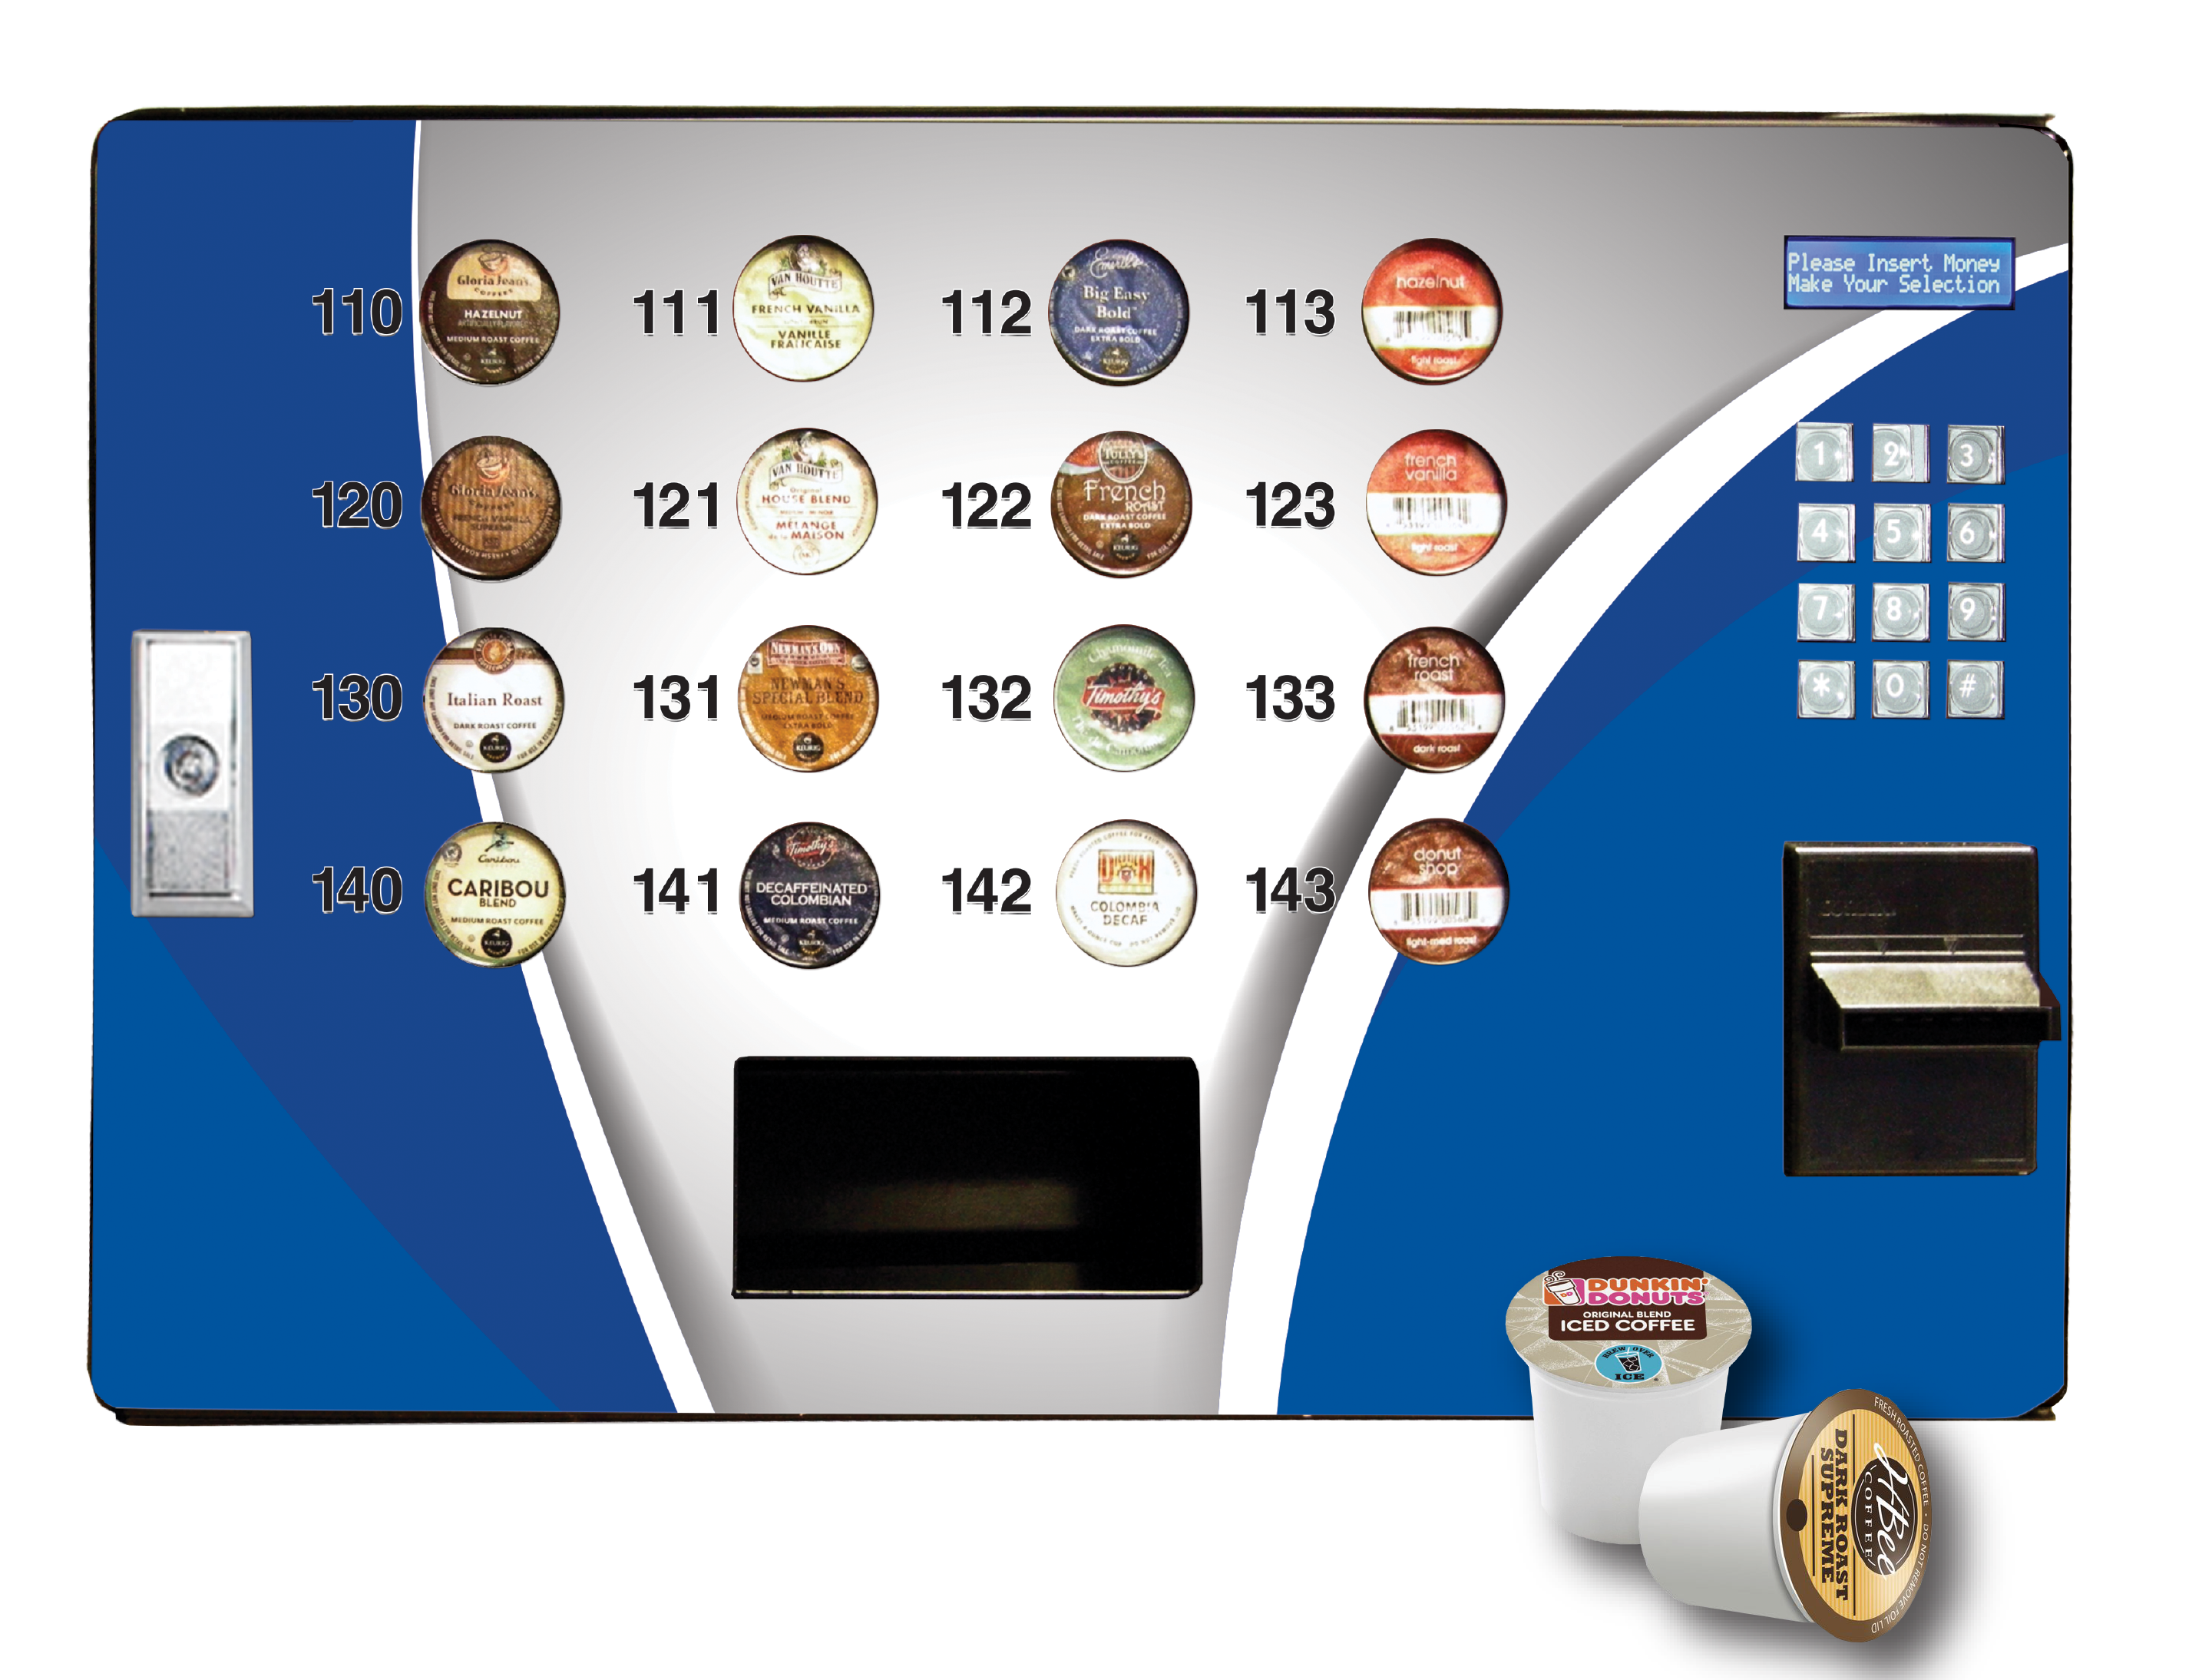 Seaga's Single Serve Coffee Station or SS16, is the most convenient machine in an office serving some popular brands including Keurig.